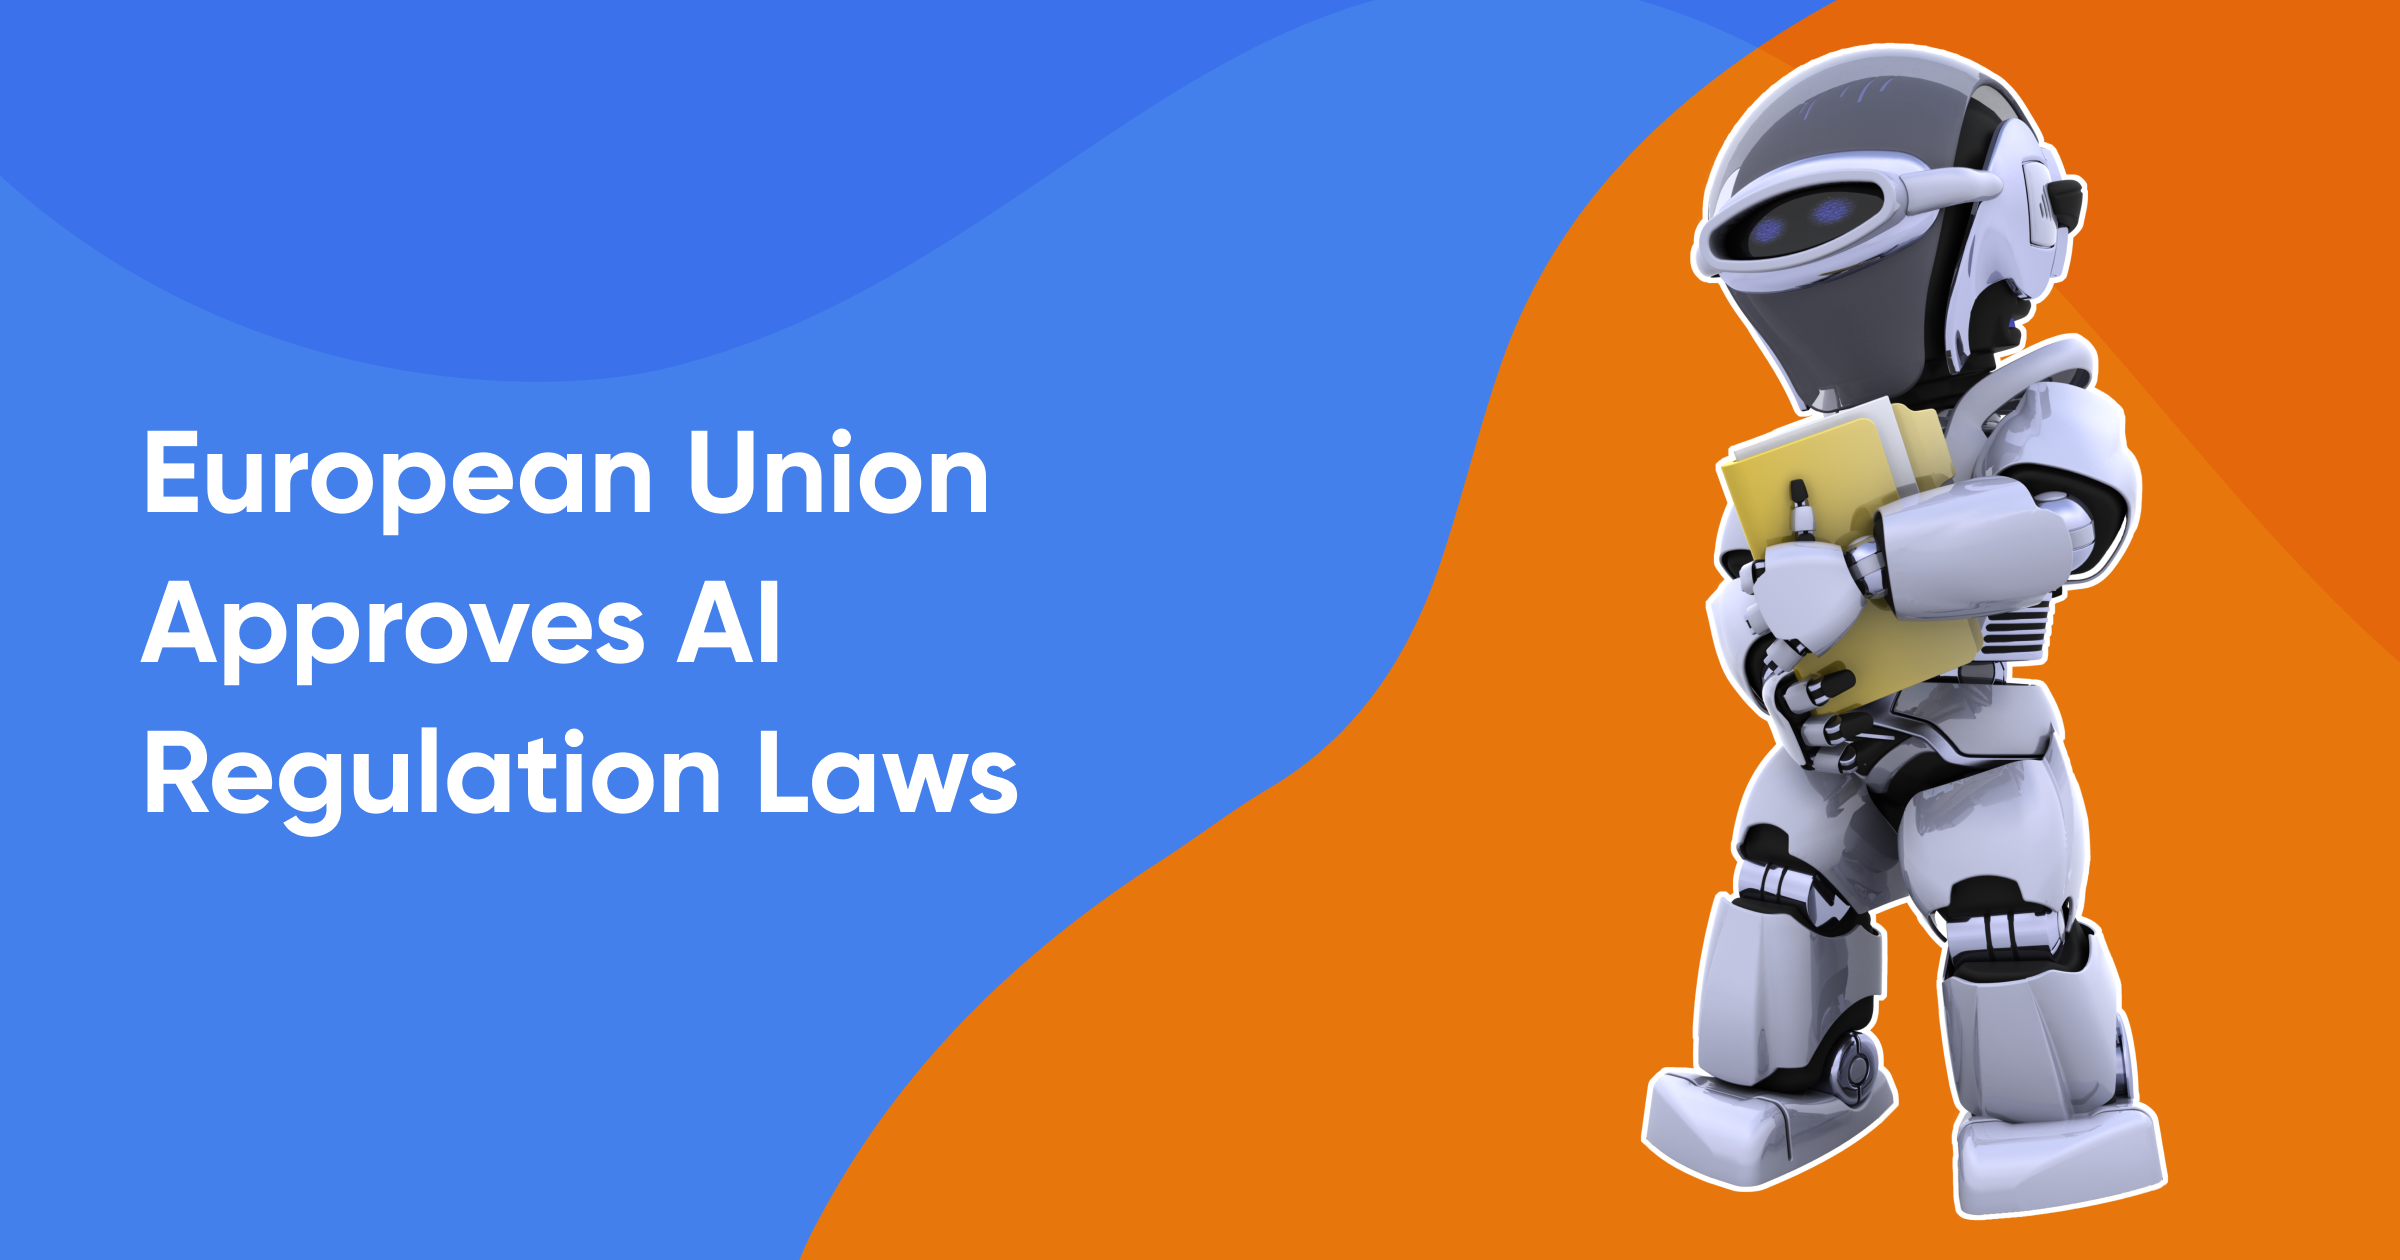 European Union Approves World's First AI Regulation Laws in Historic Deal